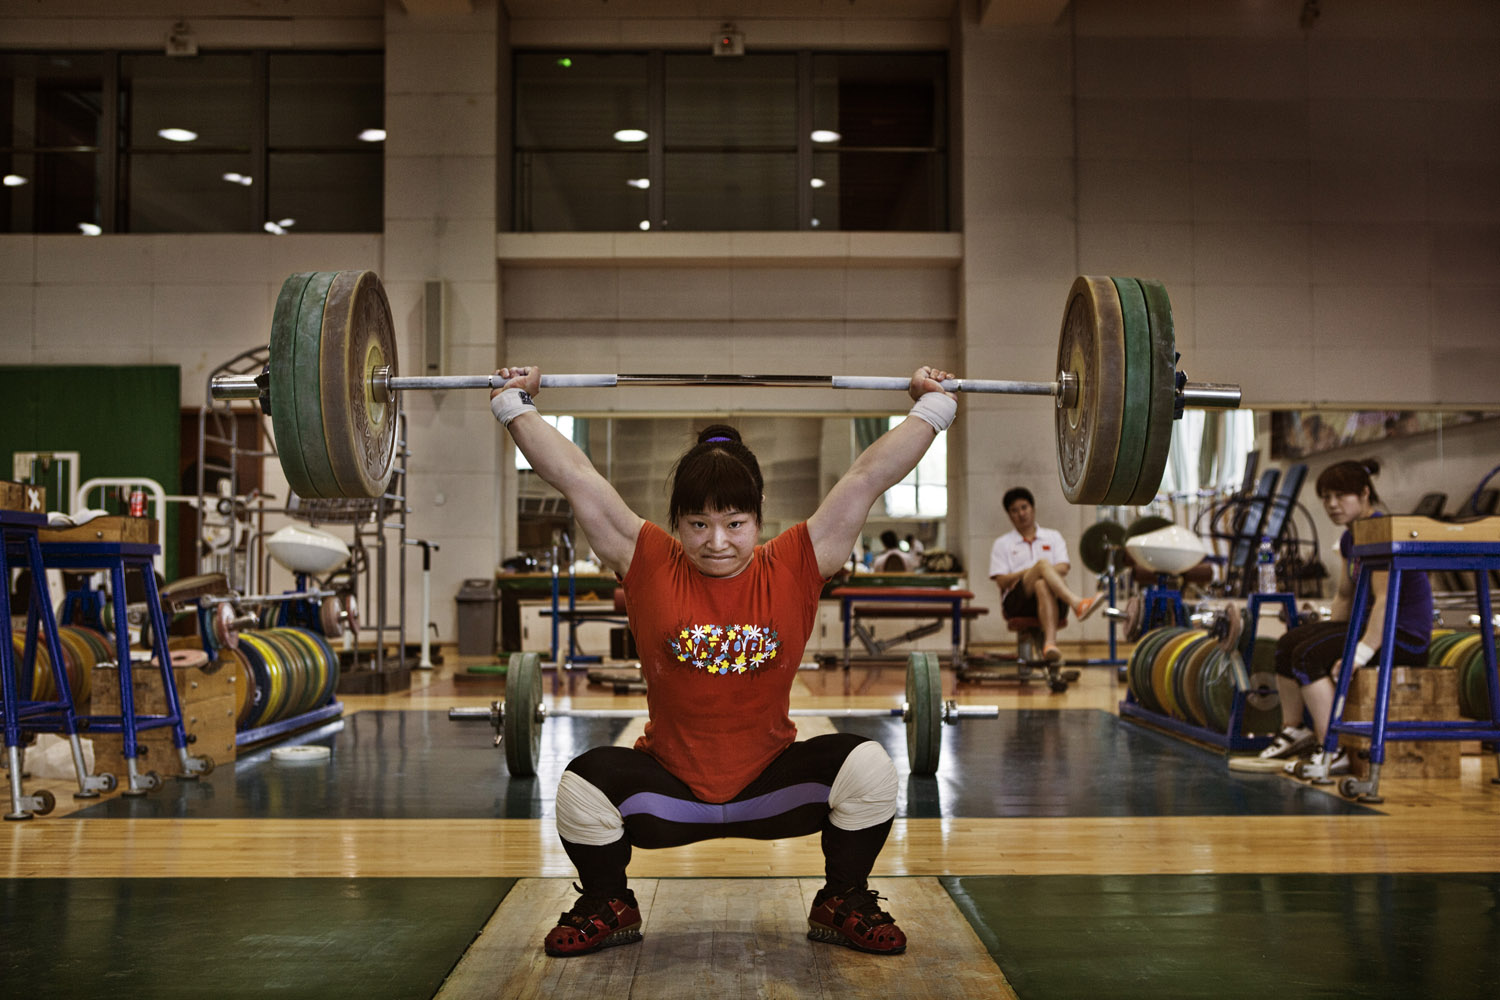 An athlete from the Chinese national women's weight-lifting team trains at the national sports training center in Beijing for a spot on the Olympic weight-lifting unit.